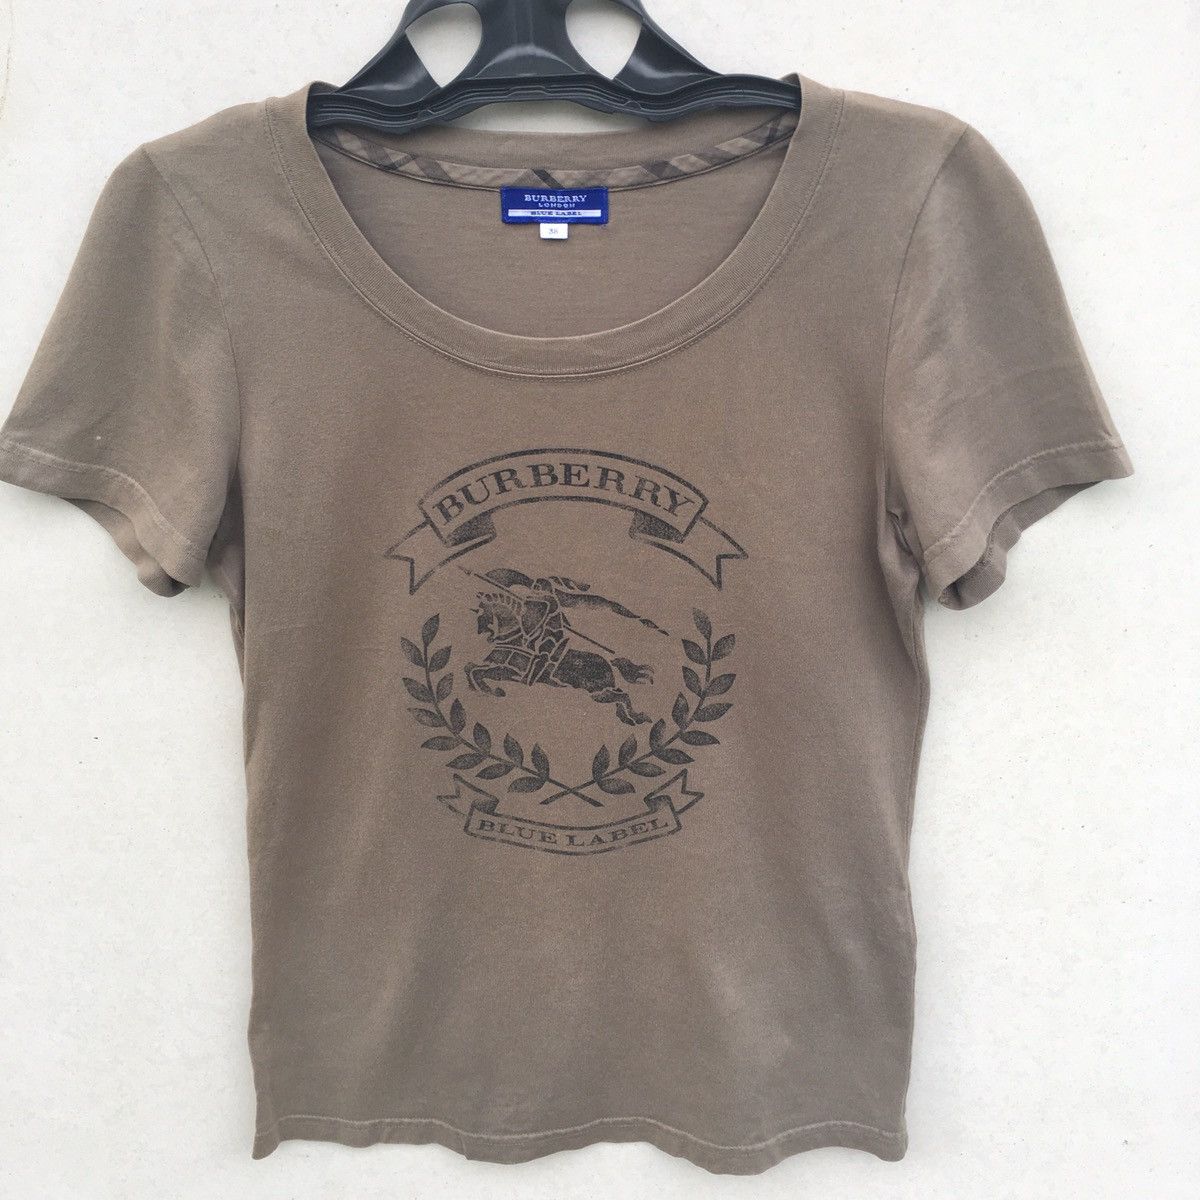 Burberry Burberry London Big Logo short sleeves Tees Size US XS / EU 42 / 0 - 2 Preview